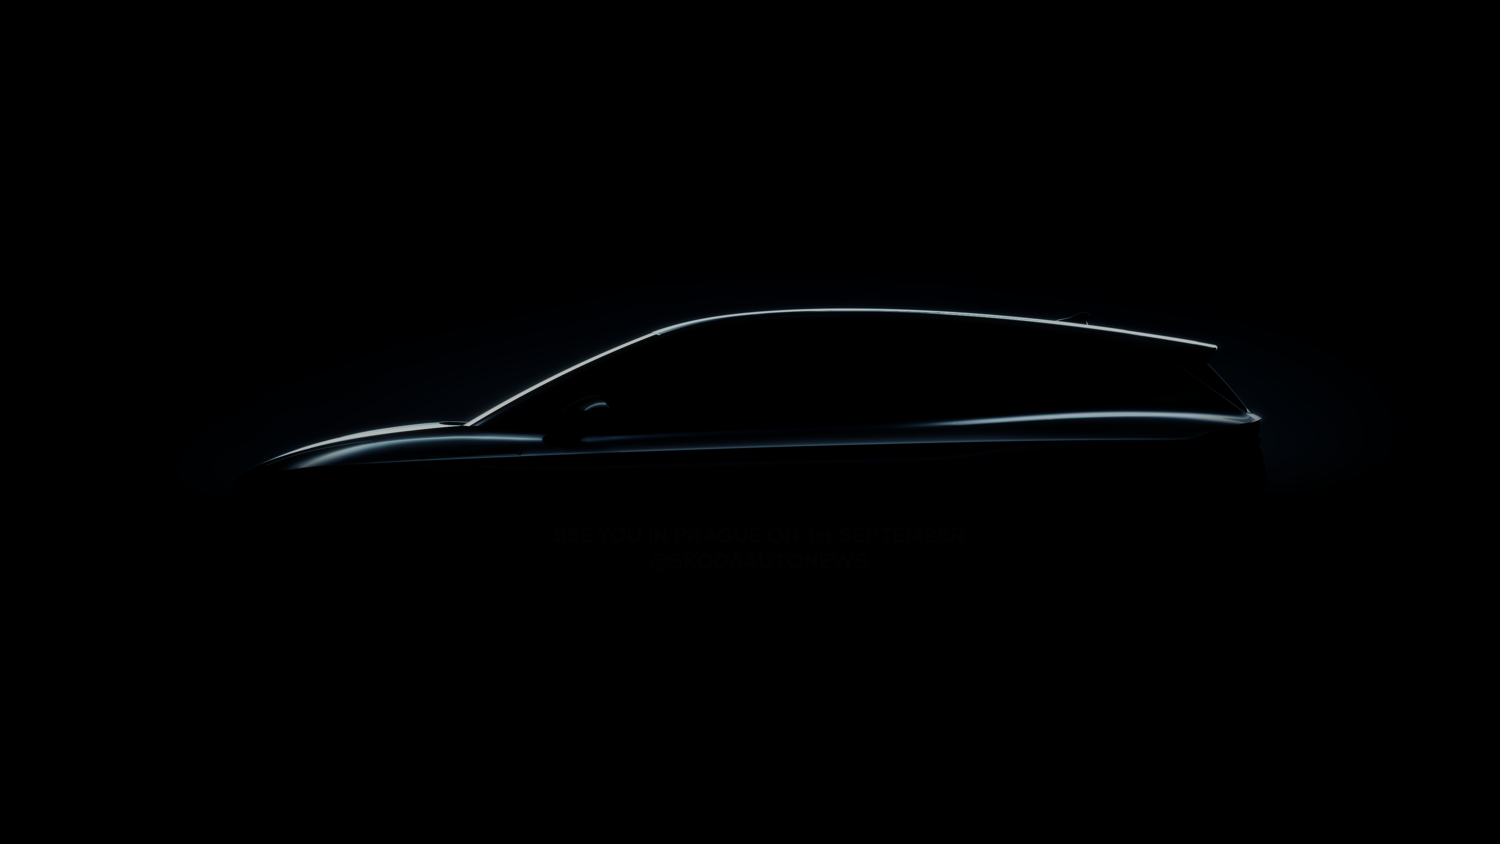 ŠKODA offers a foretaste of the new ENYAQ iV by releasing an image of a silhouette hinting at the SUV's proportions. The premiere of the first production model based on the MEB will take place on 1 September before an audience of guests in Prague.